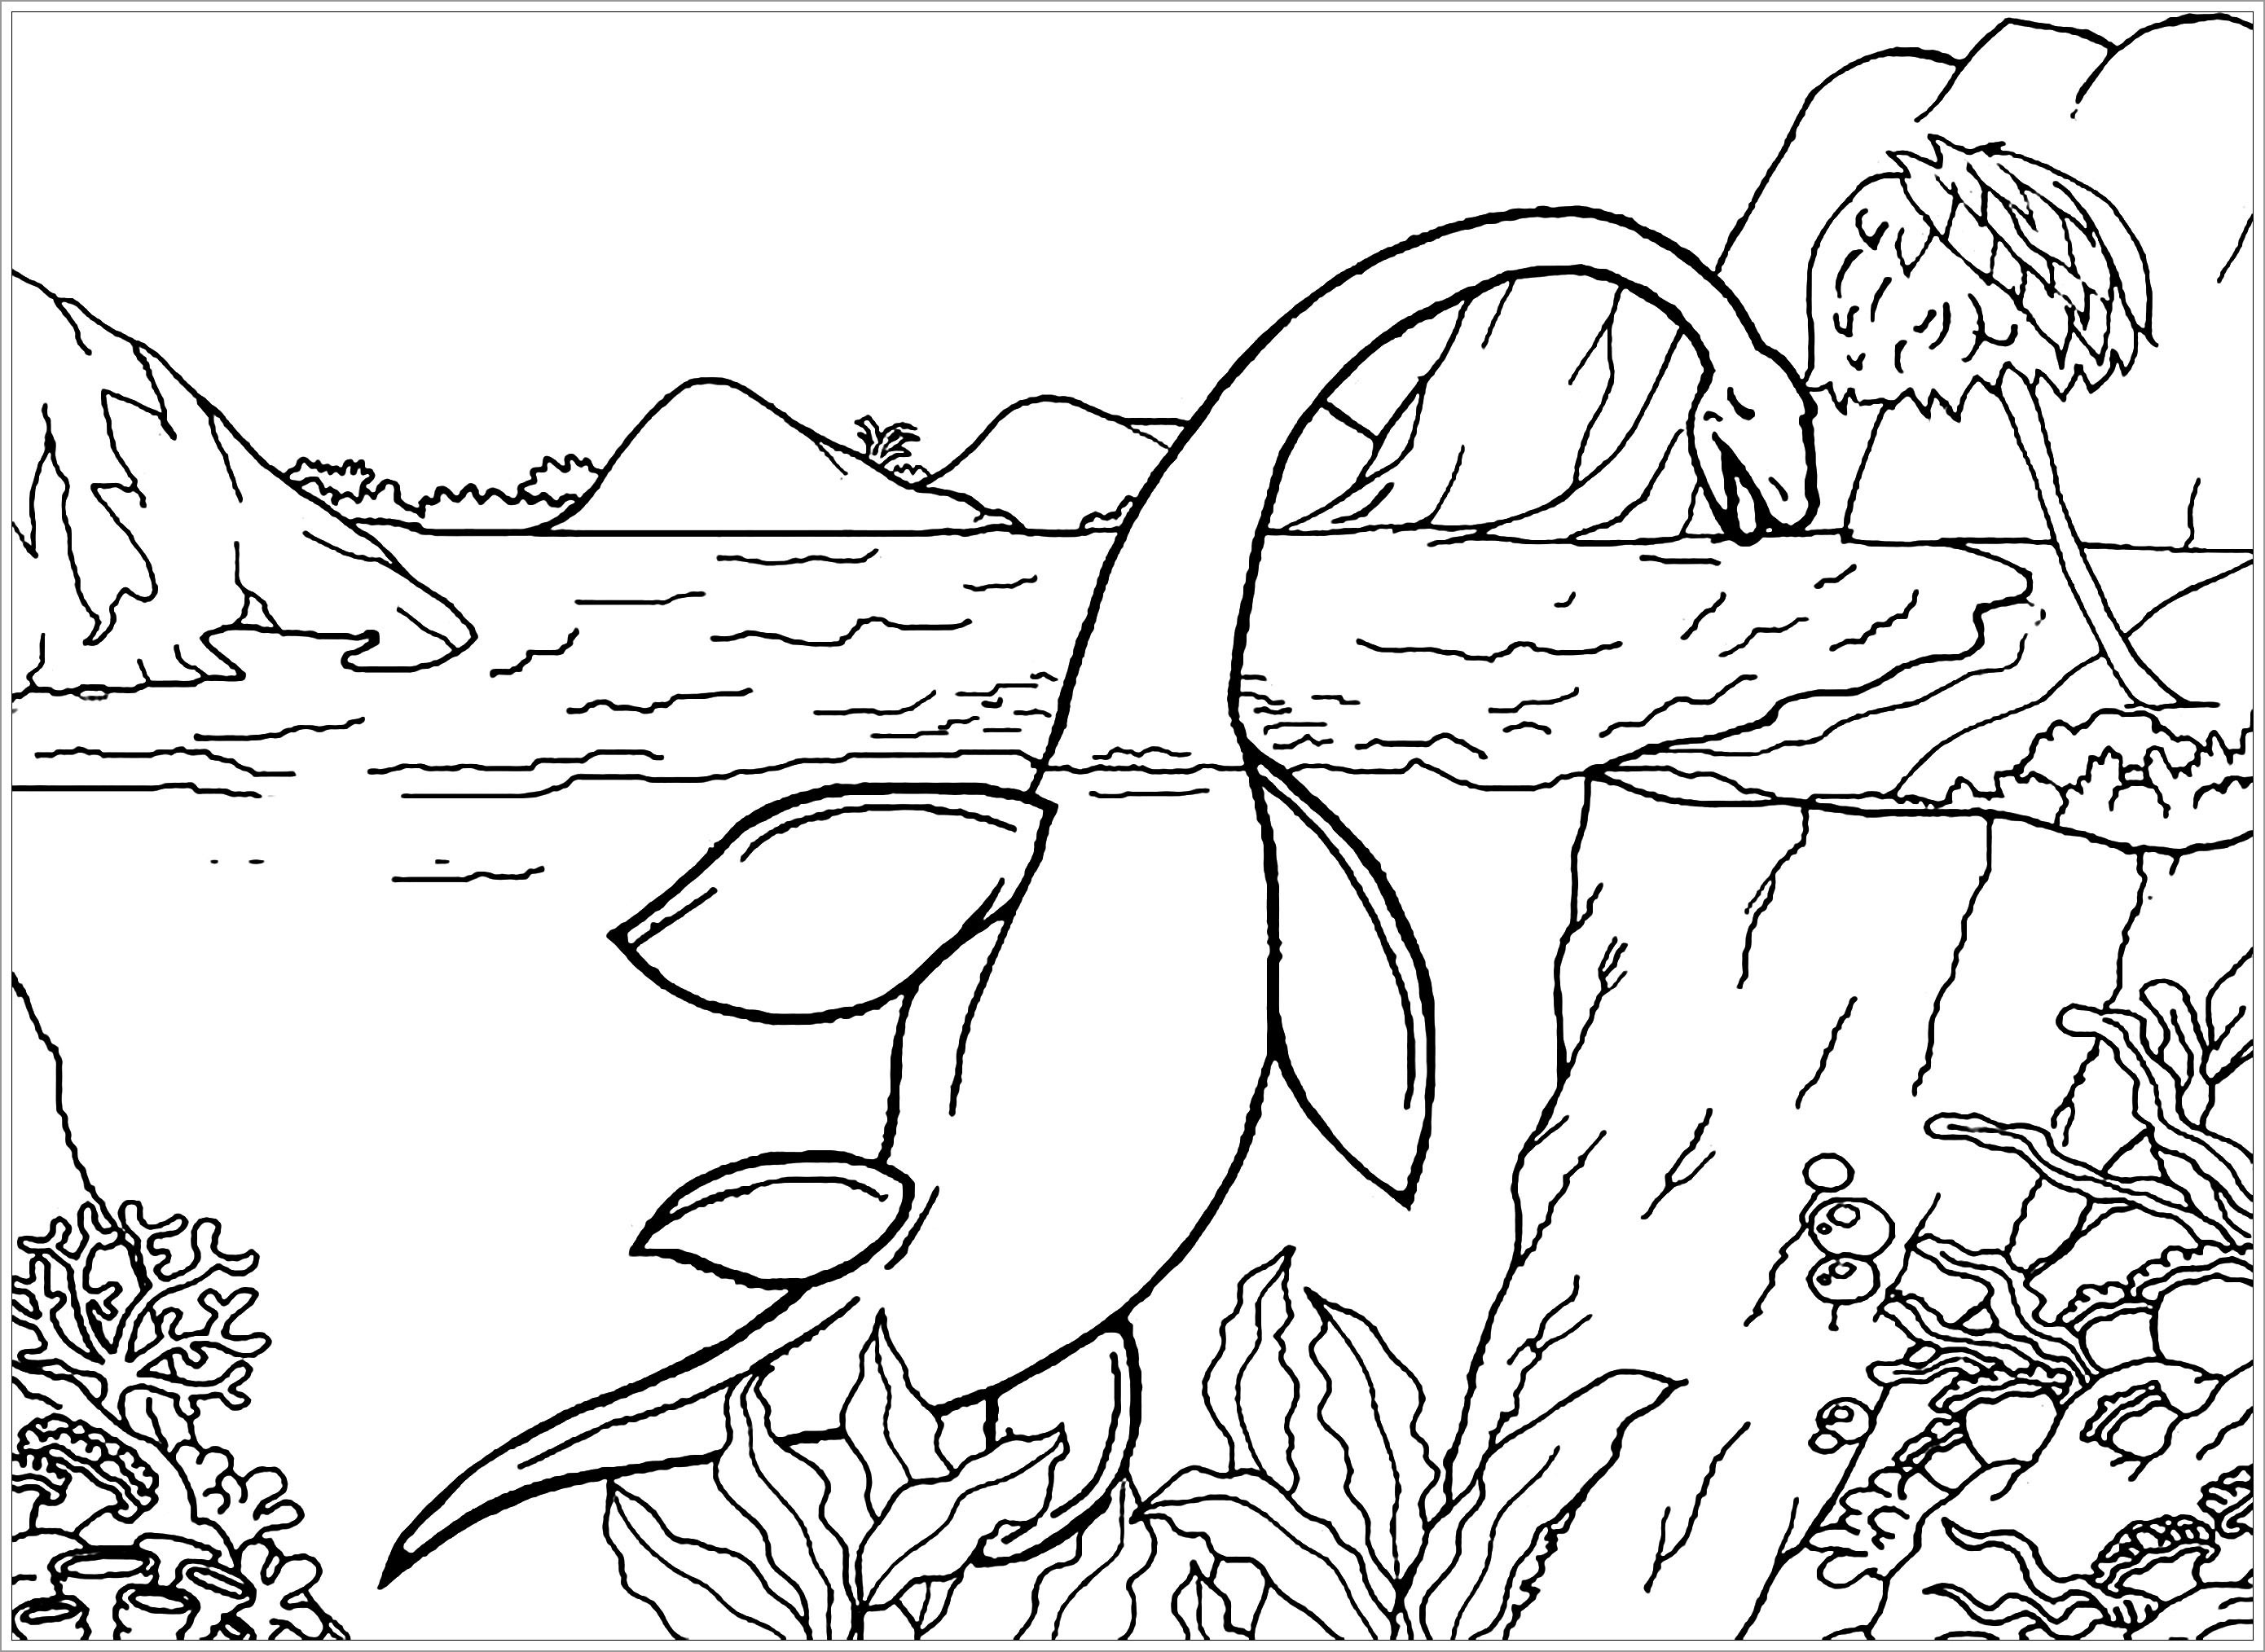 Dinosaurs Coloring Pages - ColoringBay